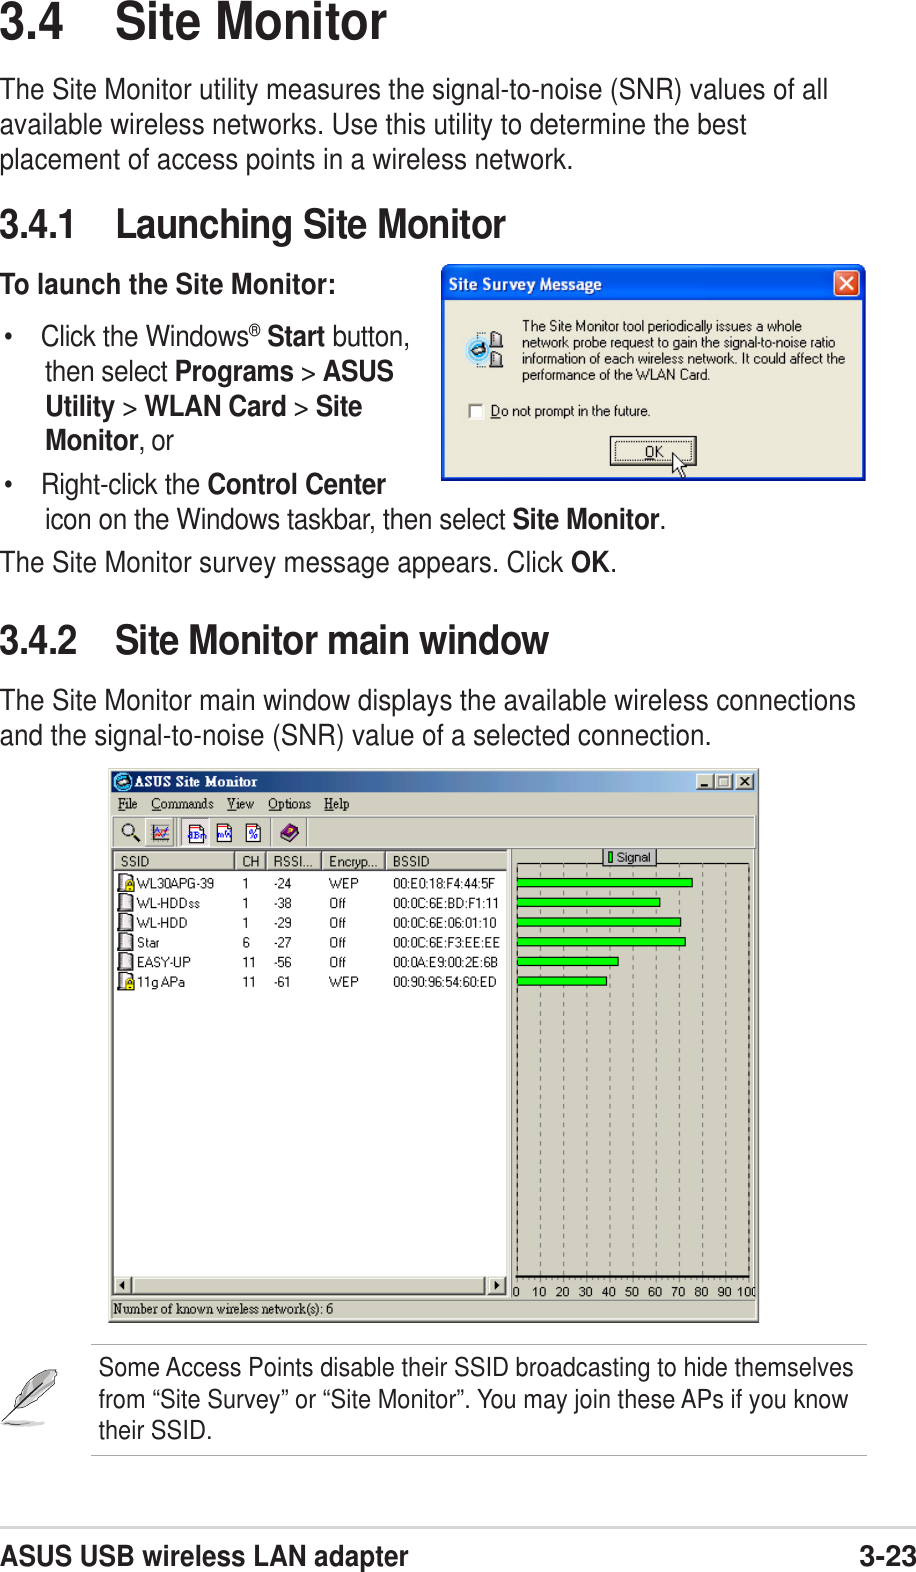 ASUS USB wireless LAN adapter3-233.4 Site MonitorThe Site Monitor utility measures the signal-to-noise (SNR) values of allavailable wireless networks. Use this utility to determine the bestplacement of access points in a wireless network.3.4.1 Launching Site MonitorTo launch the Site Monitor:• Click the Windows®Start button,then select Programs &gt; ASUSUtility &gt; WLAN Card &gt; SiteMonitor, or• Right-click the Control Centericon on the Windows taskbar, then select Site Monitor.The Site Monitor survey message appears. Click OK.3.4.2 Site Monitor main windowThe Site Monitor main window displays the available wireless connectionsand the signal-to-noise (SNR) value of a selected connection.Some Access Points disable their SSID broadcasting to hide themselvesfrom “Site Survey” or “Site Monitor”. You may join these APs if you knowtheir SSID.